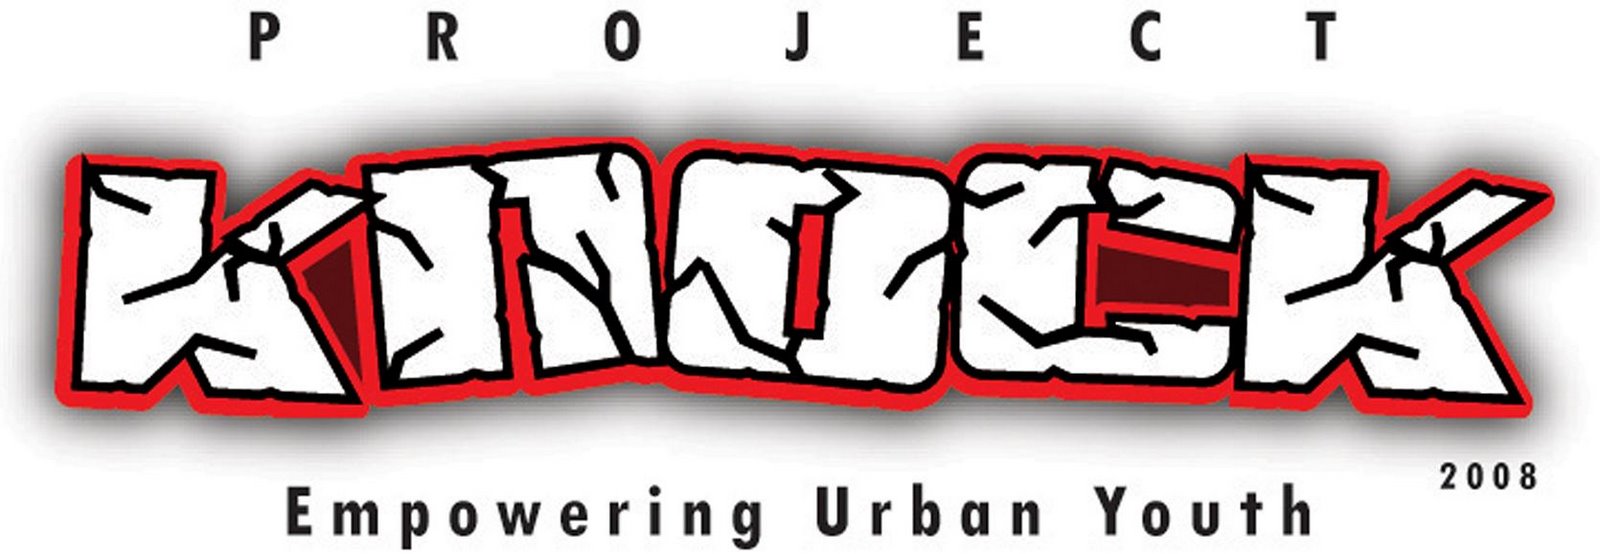 Project Knock: Empowering Urban Youth Official Website